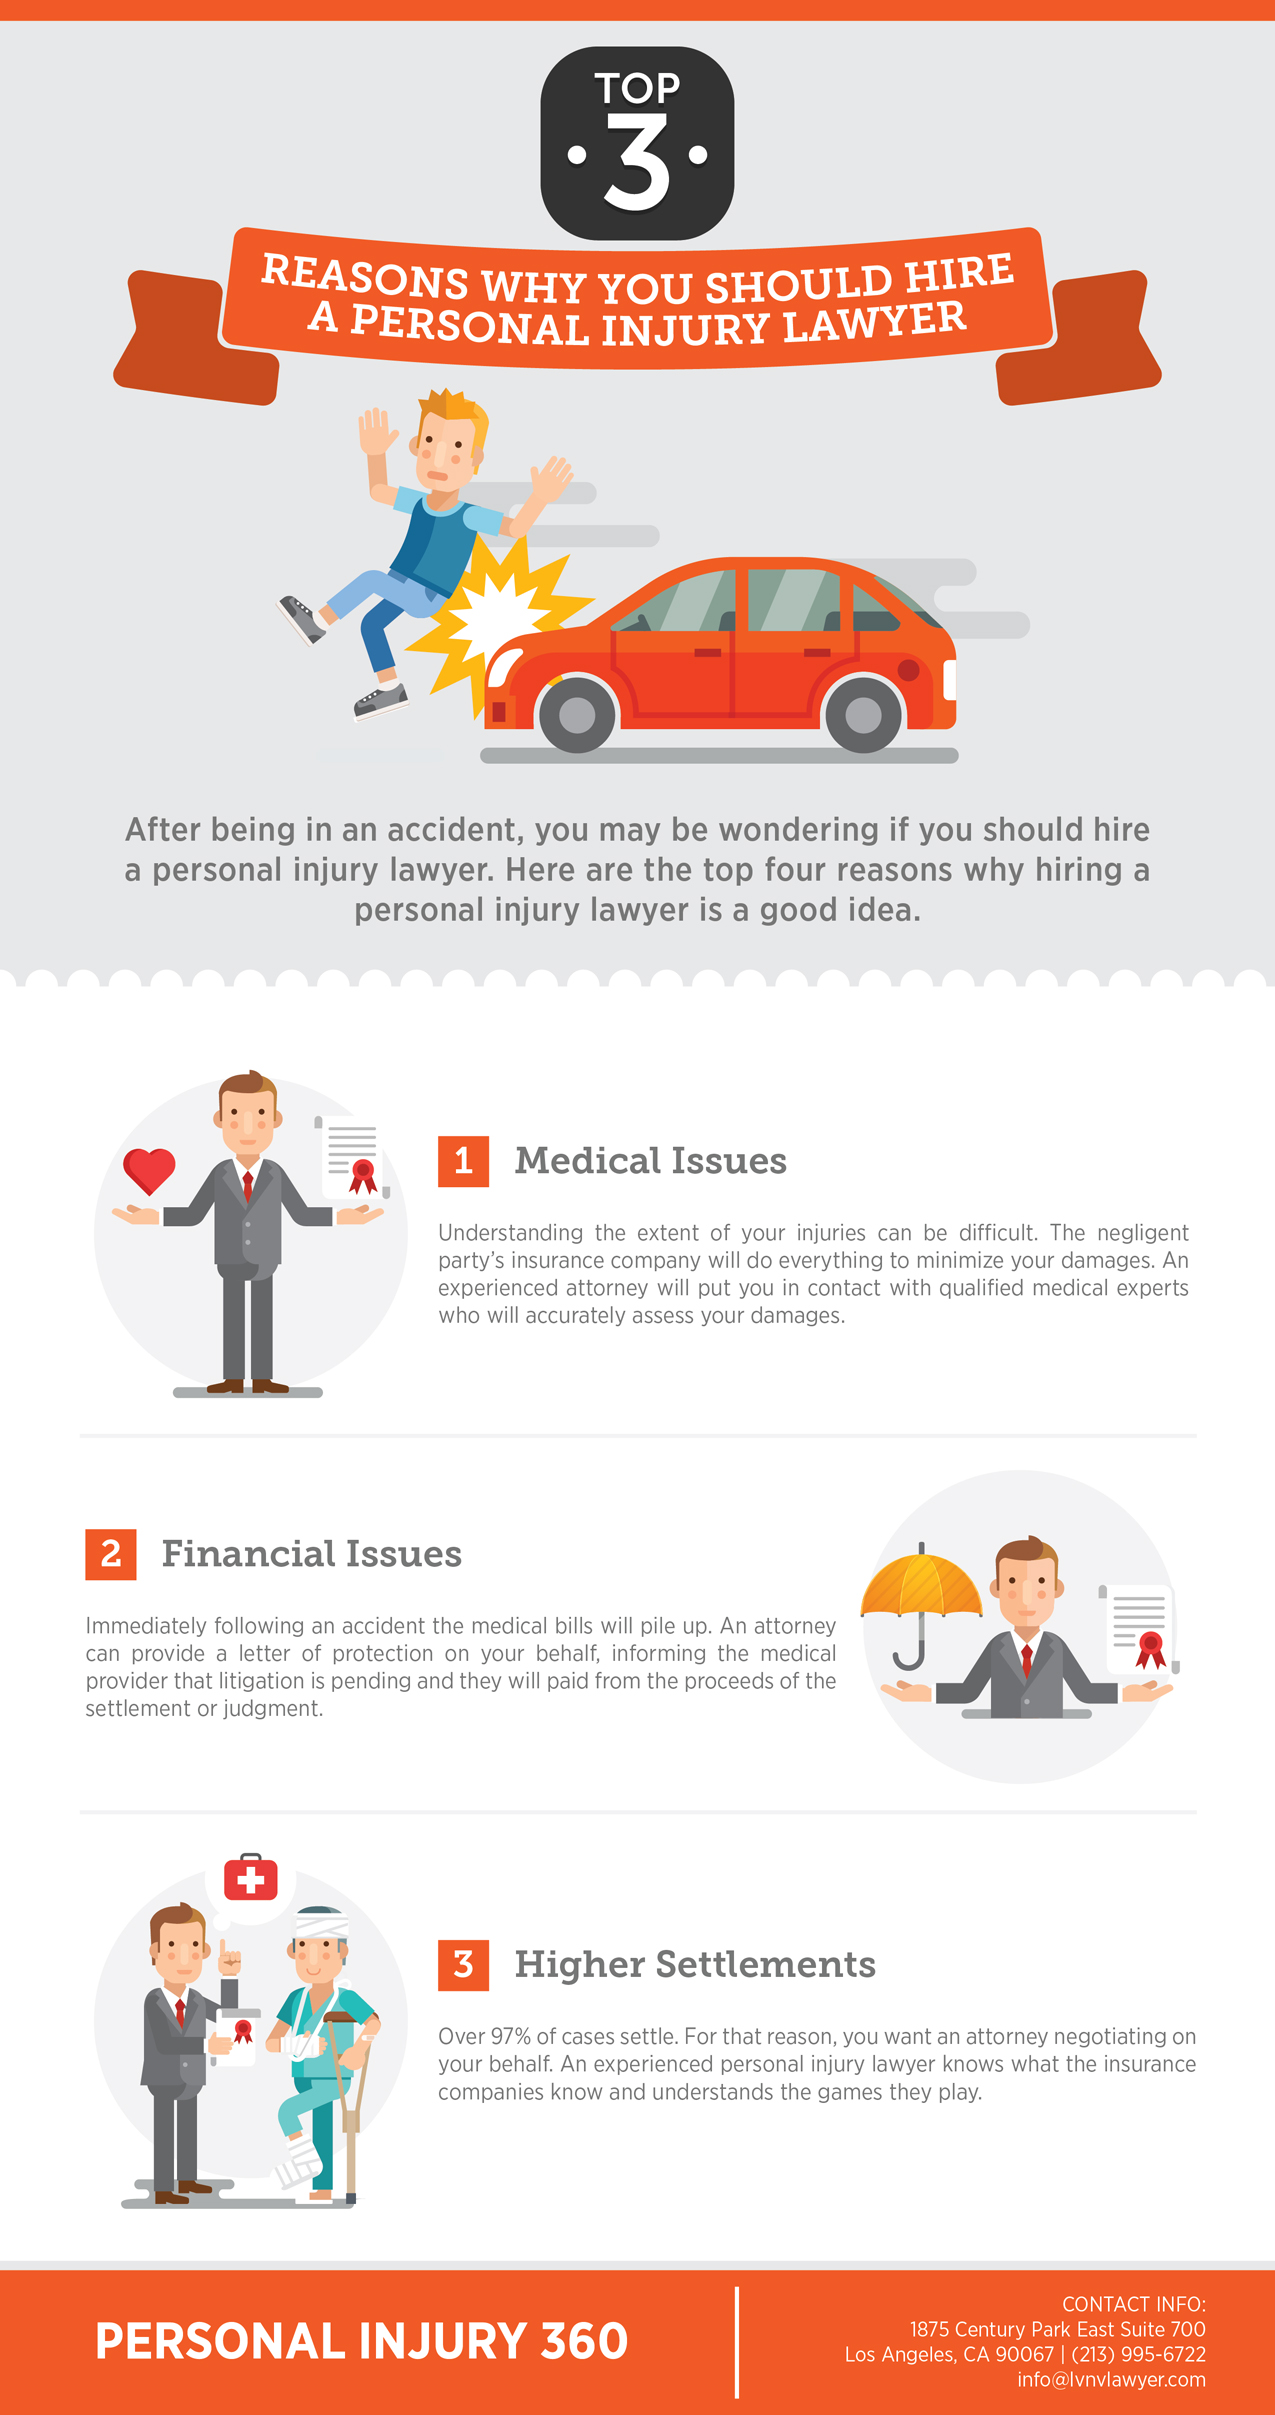 Top 3 Reasons Why You Should Hire a Car Accident Lawyer